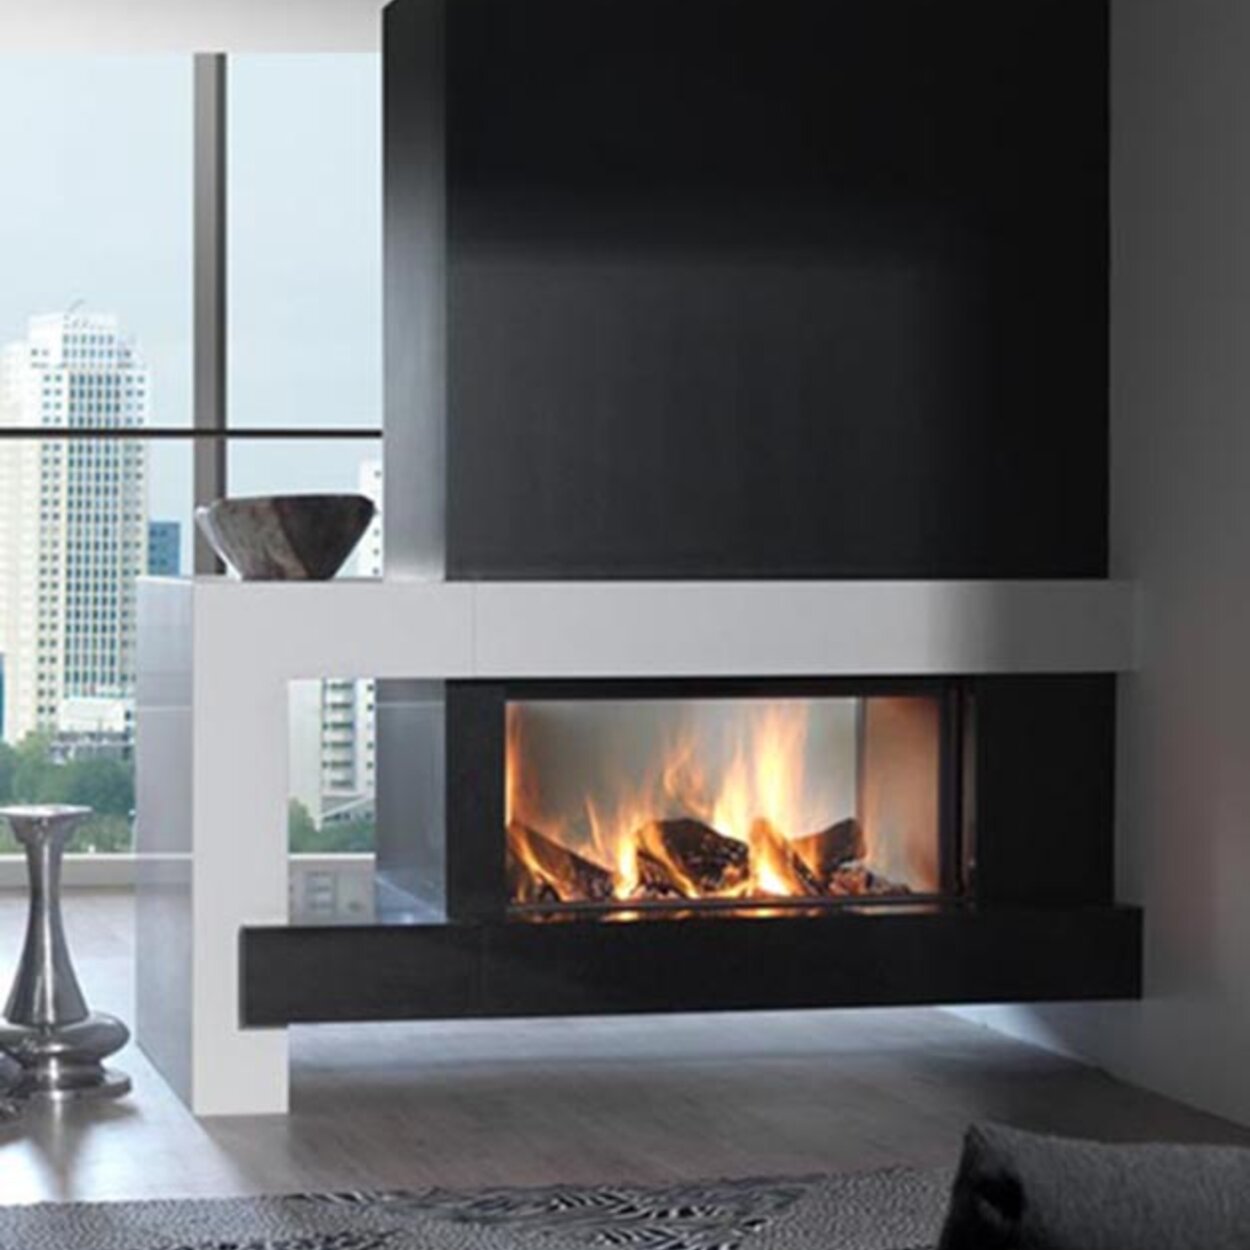 Wood fireplace W105/47T by Kalfire as tunnel version is located between the couch and the large window front with a view of the city